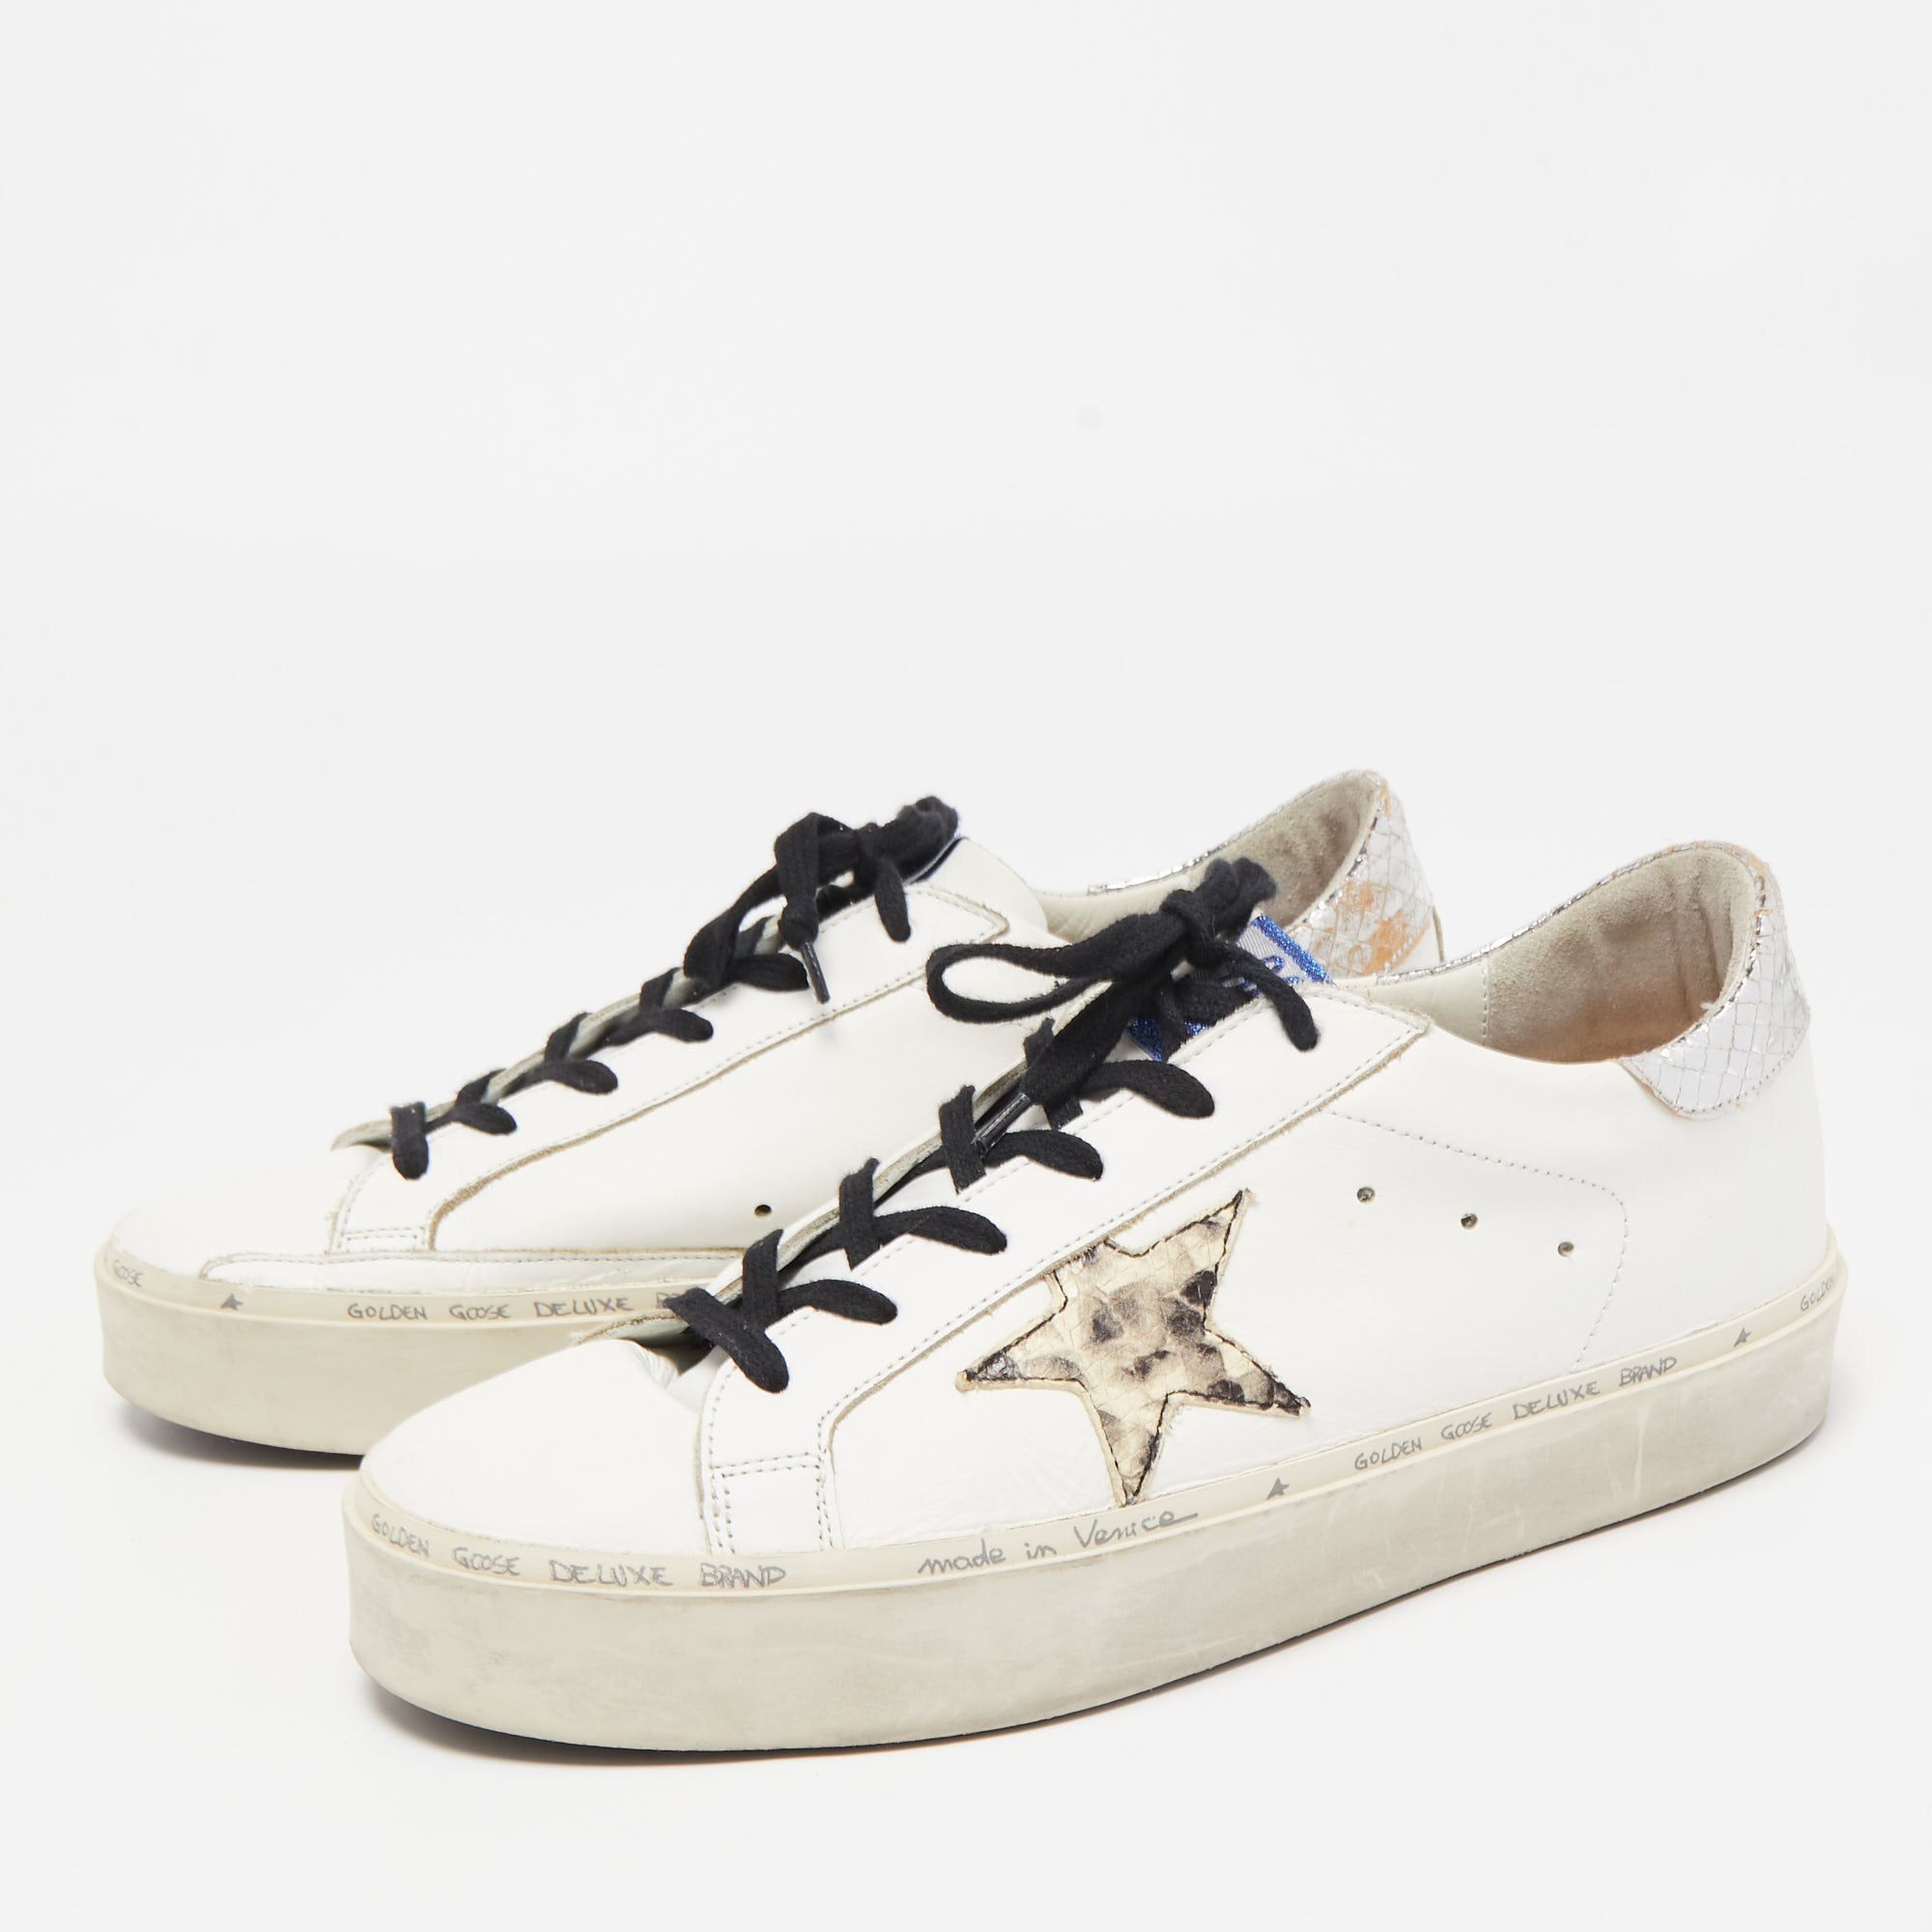 

Golden Goose White/Silver Leather and Python Embossed Leather Hi Star Sneakers Size